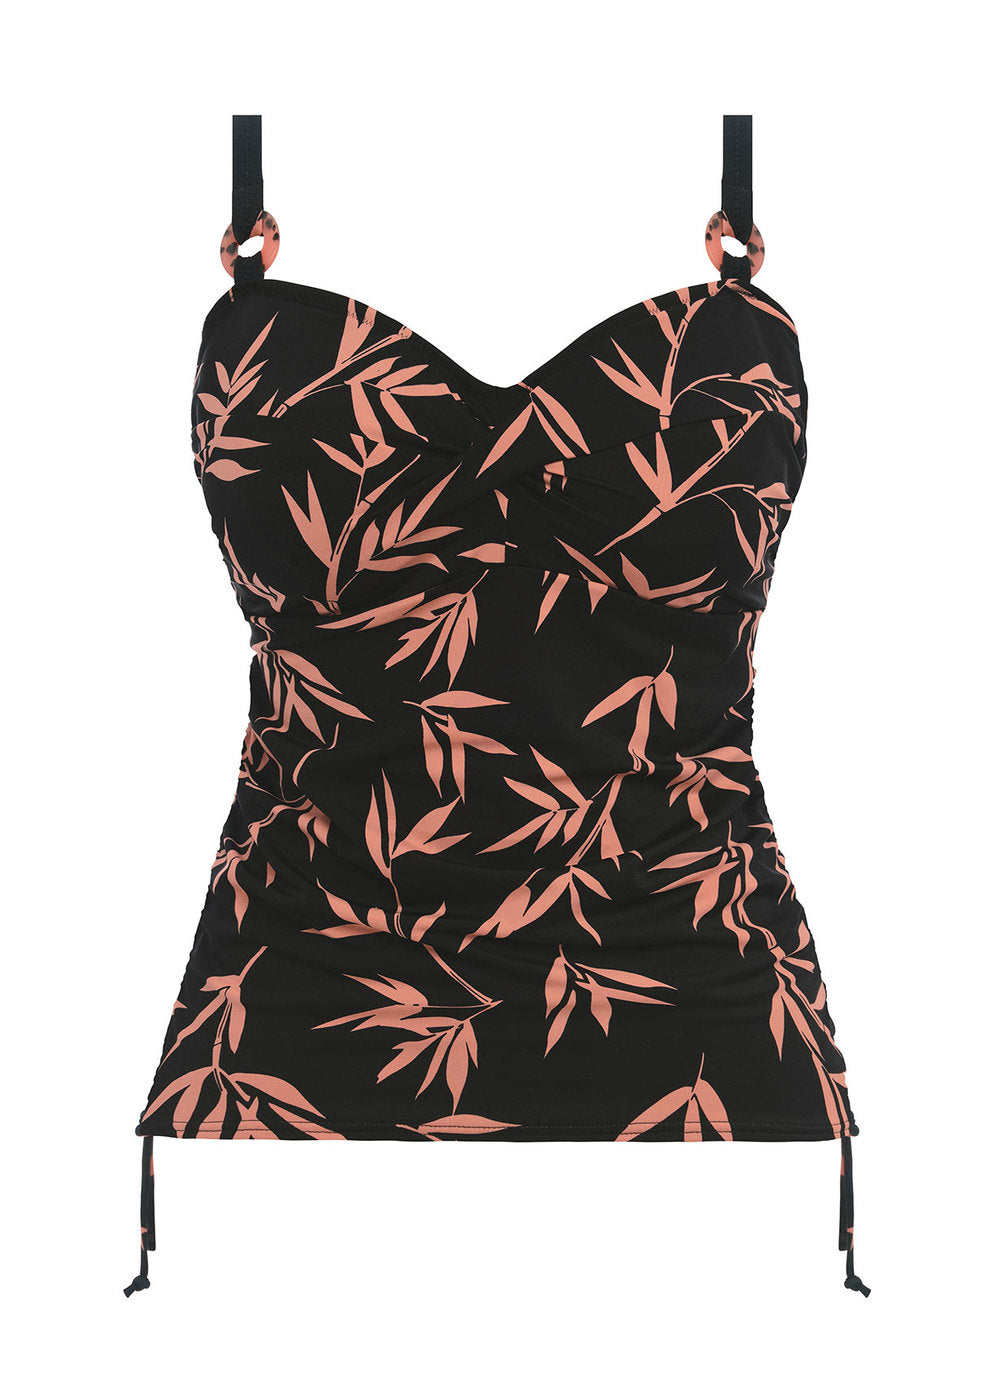 Product shot of Fantasie Swim Luna Bay Tankini Top in lacquered black with copper fern print.